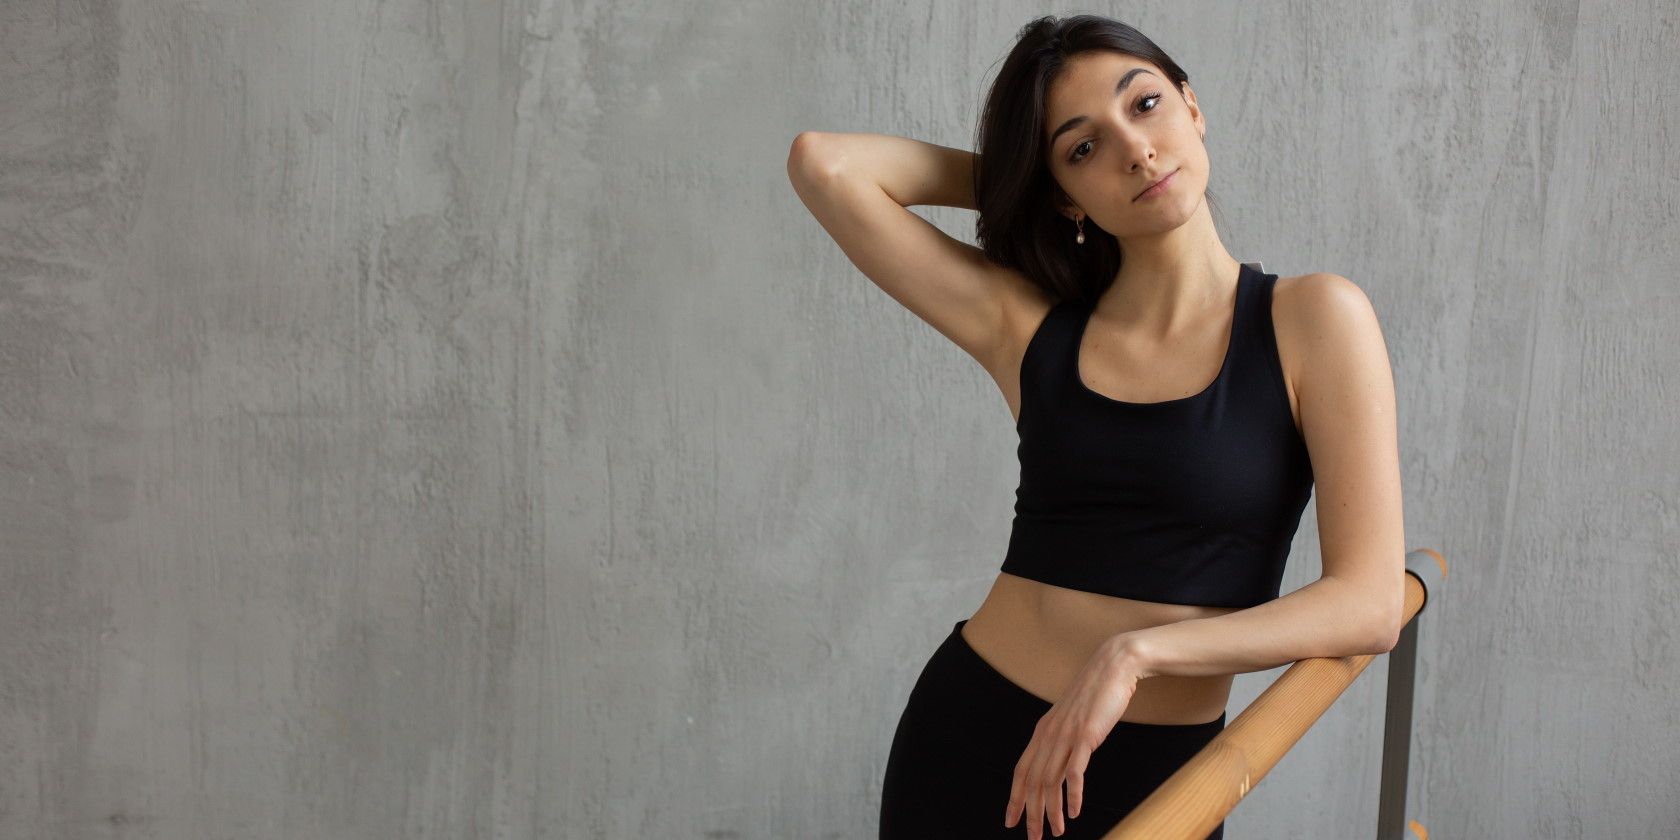 People Are Doing Hot Barre Workouts Now And Here's What You Need To Know